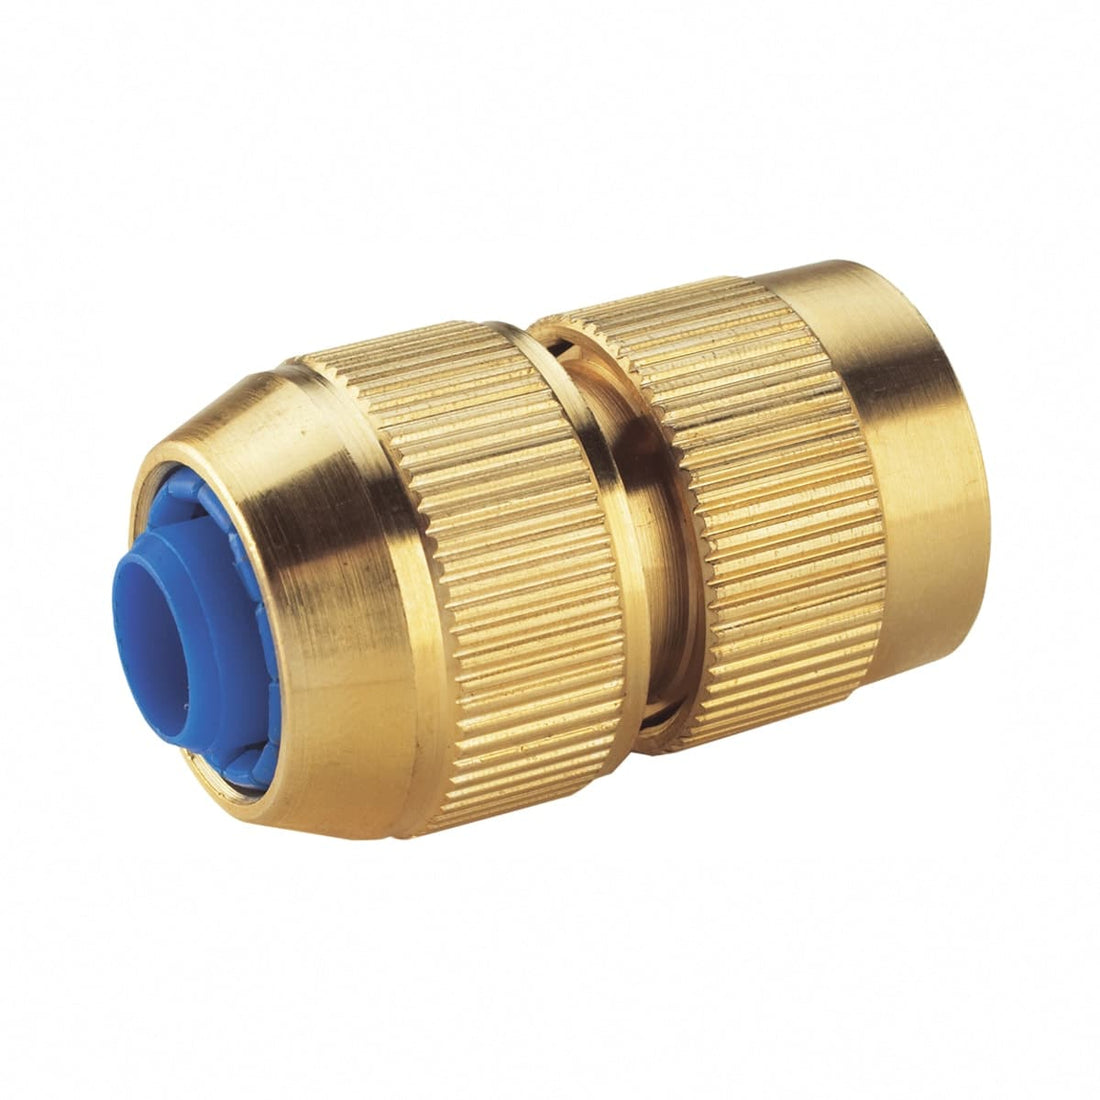 BRASS QUICK COUPLING FOR 12 AND 15 MM DIAMETER PIPES COLORTAP